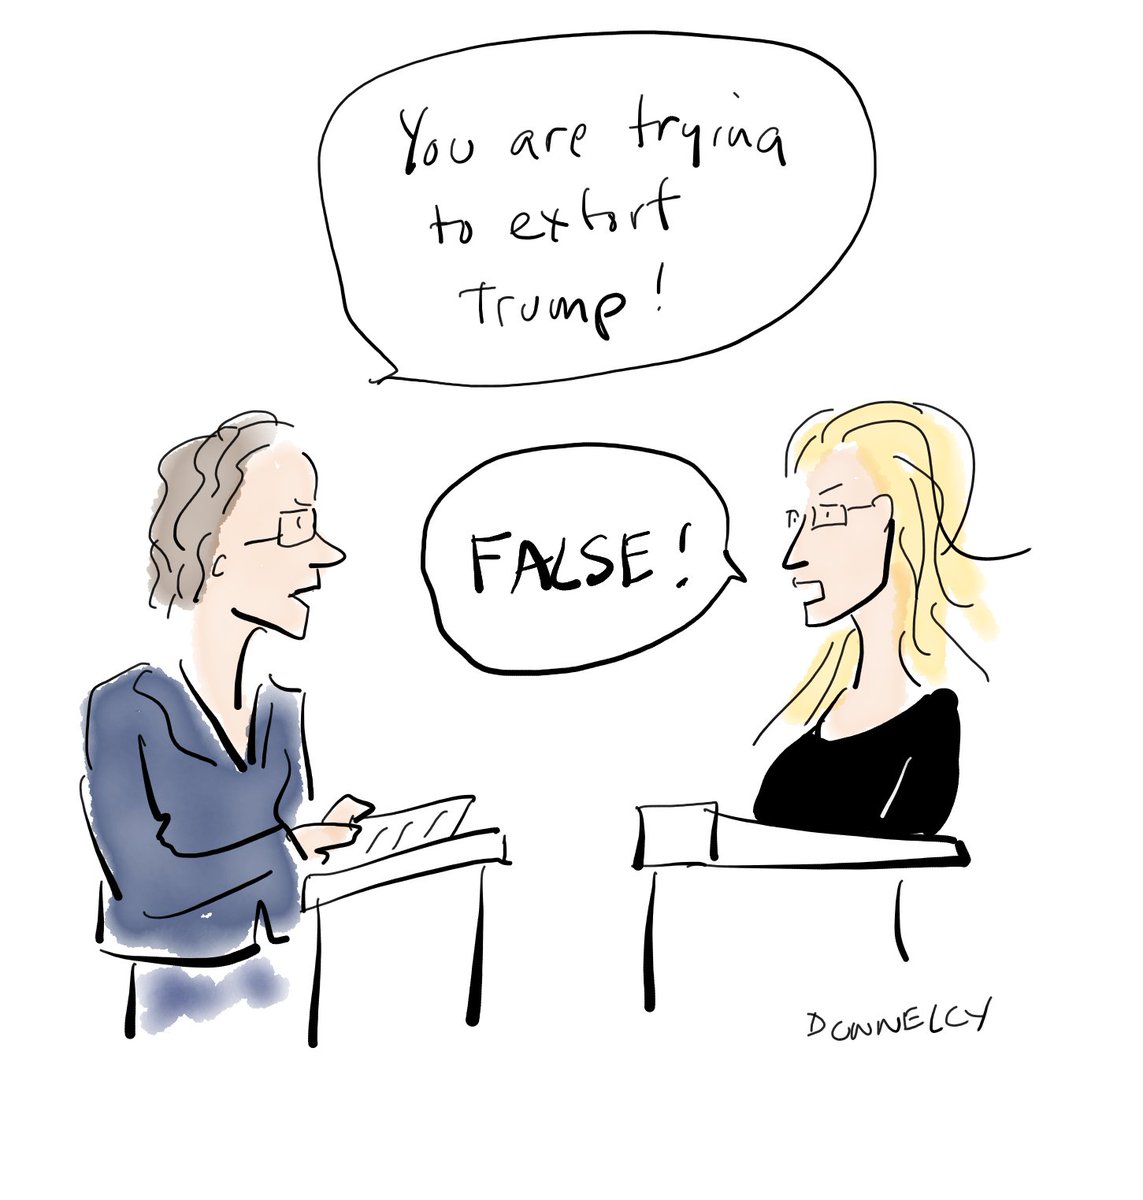 @jaketapper and @lizadonnelly has been there!